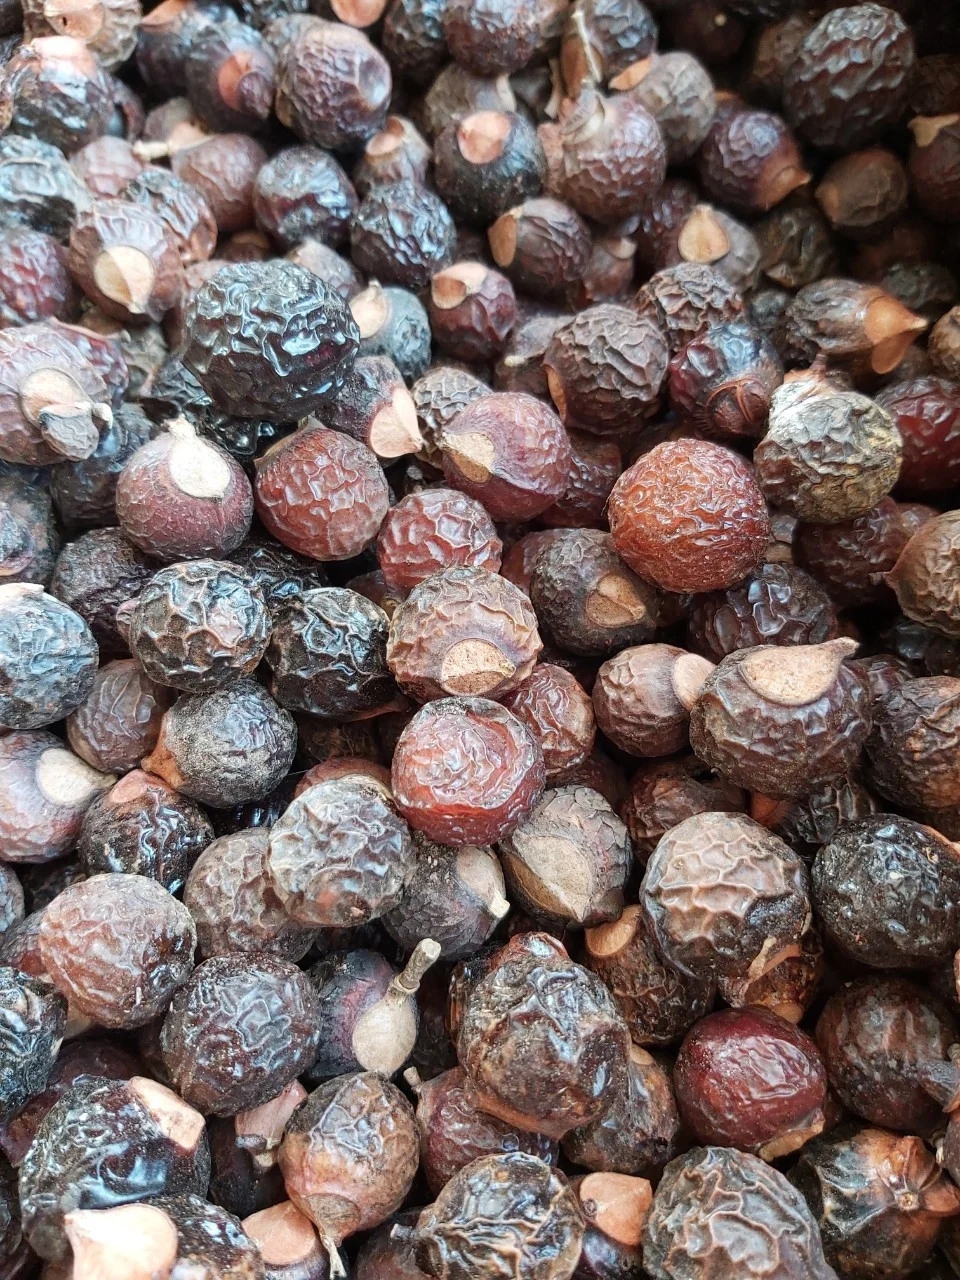 Soap Nuts Cleaning / Natural Soap Nuts 2020 /+84-845-639-639 (Whatsapp)